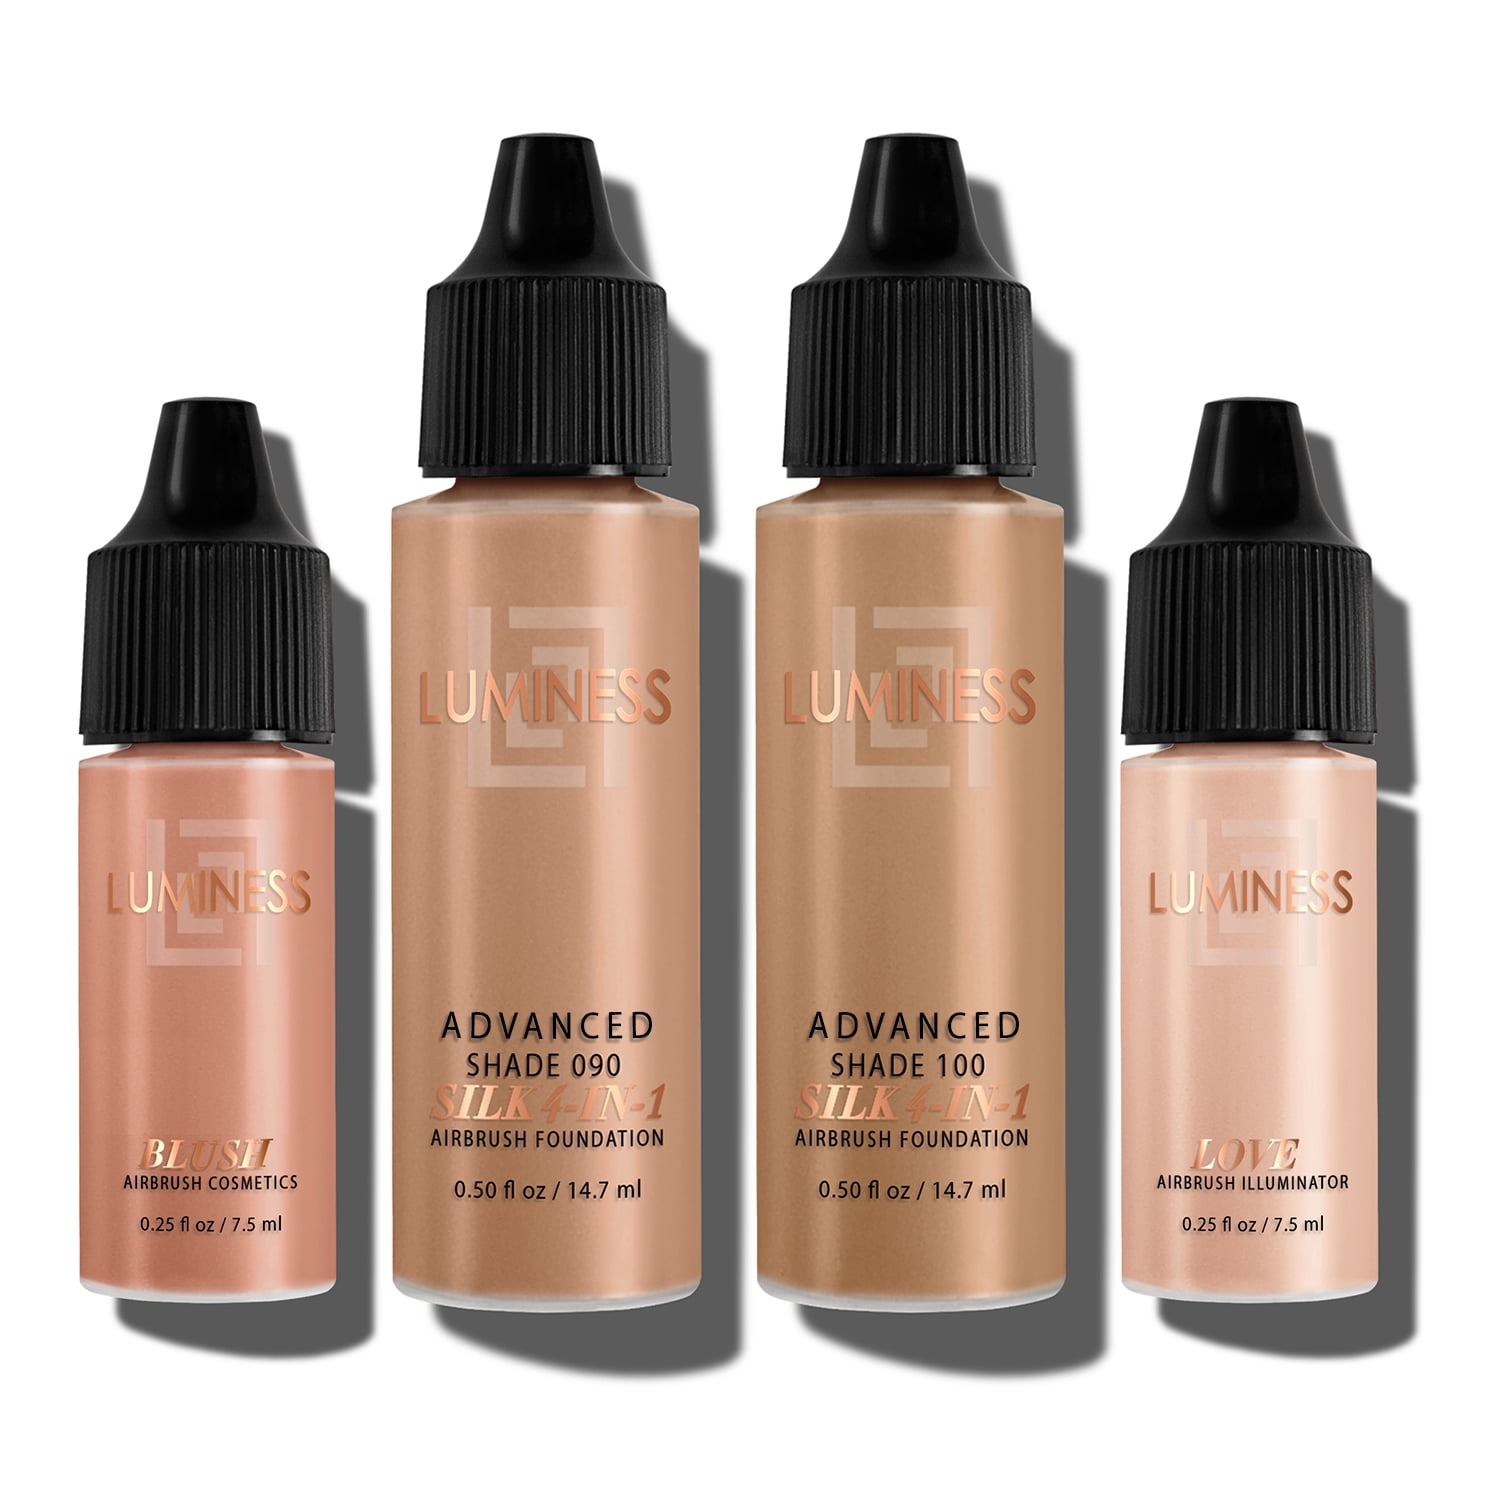  Luminess Air Silk 4-In-1 Airbrush Foundation- Foundation,  Shade 070 (.5 Fl Oz) - Sheer to Medium Coverage - Anti-Aging Formula  Hydrates and Moisturizes - Professional Makeup Kit for Cordless Air